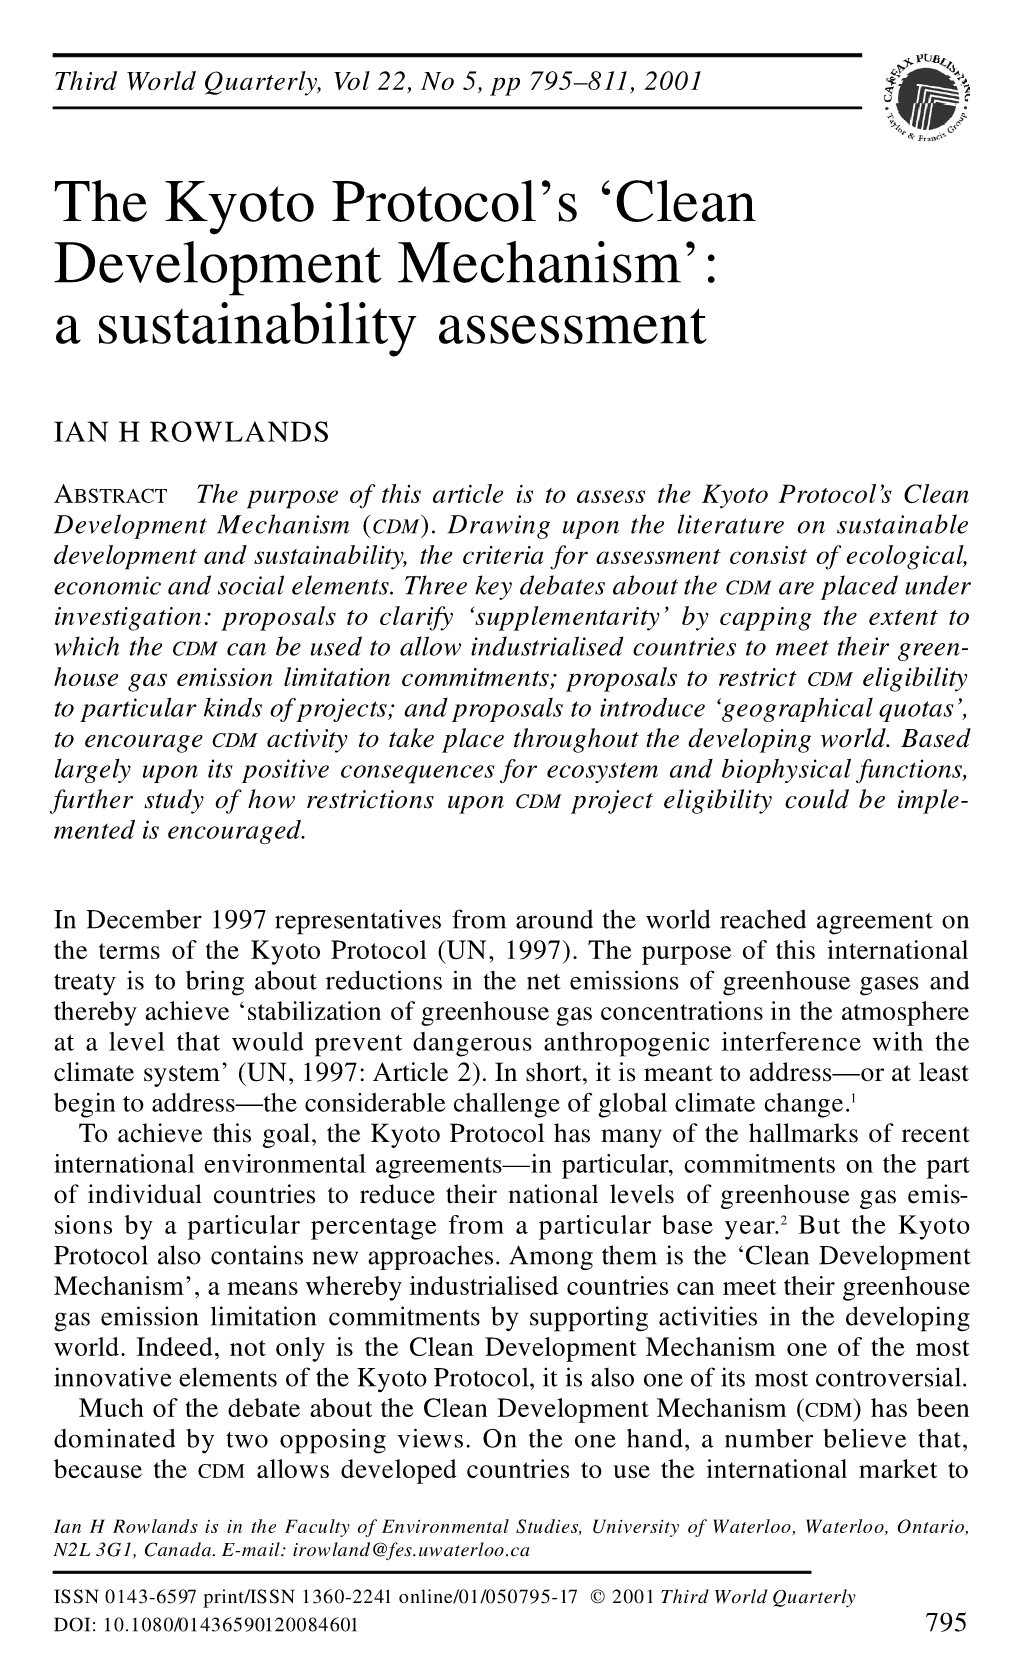 The Kyoto Protocol's 'Clean Development Mechanism': A